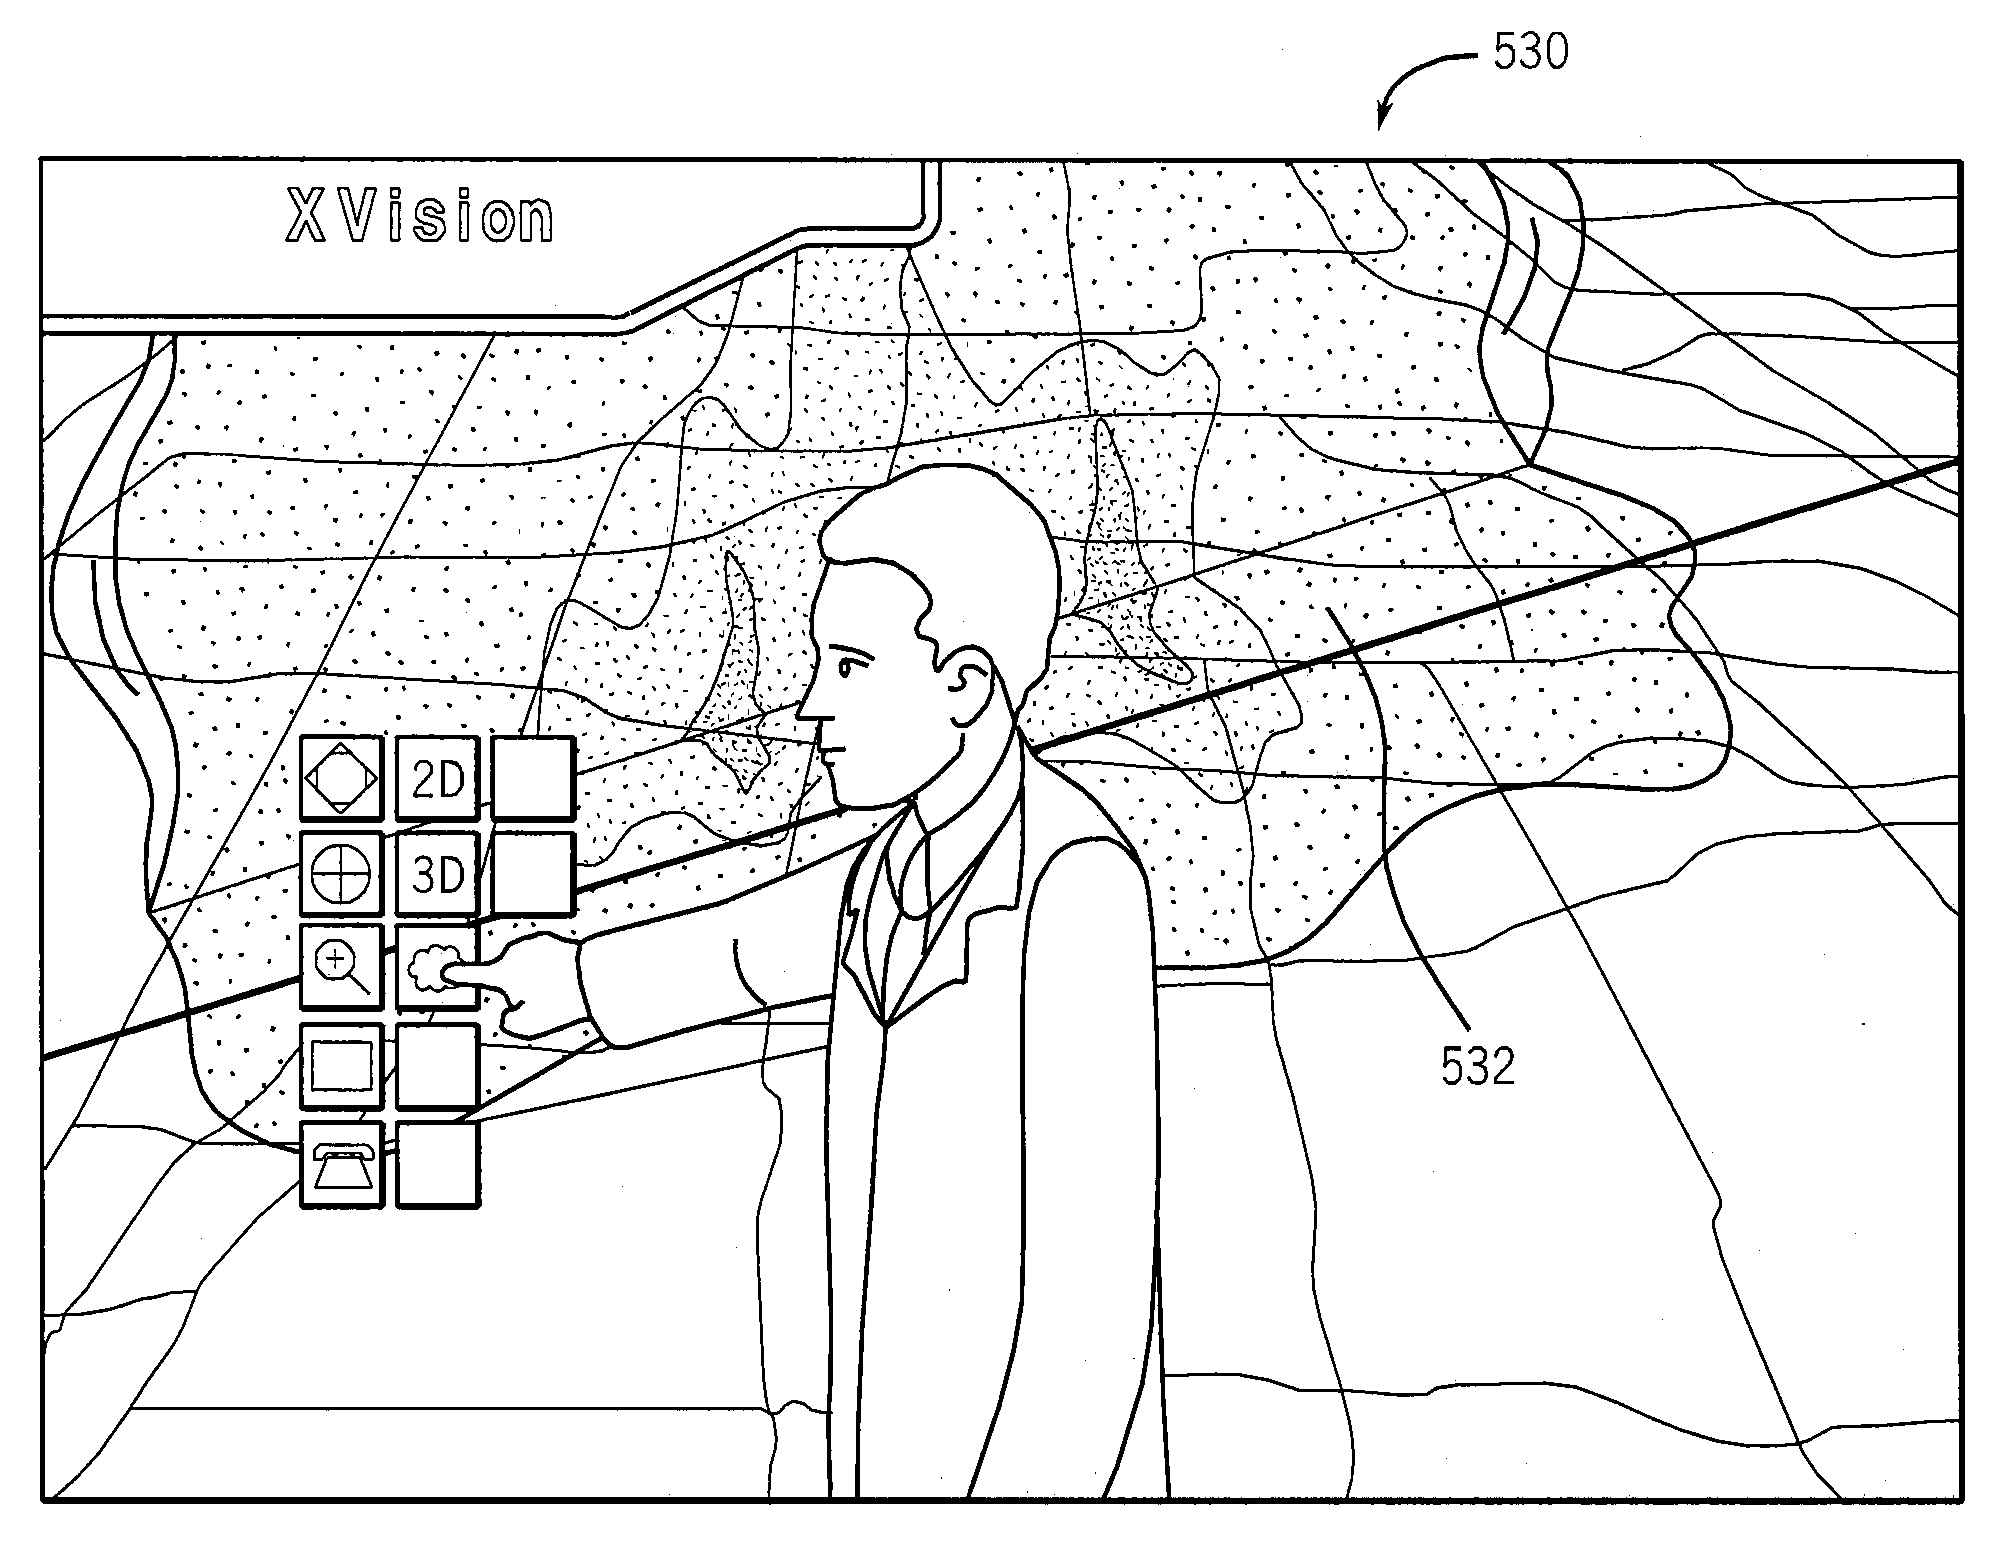 System and Method for Presenting Wind Speed Information in a Planar Representation